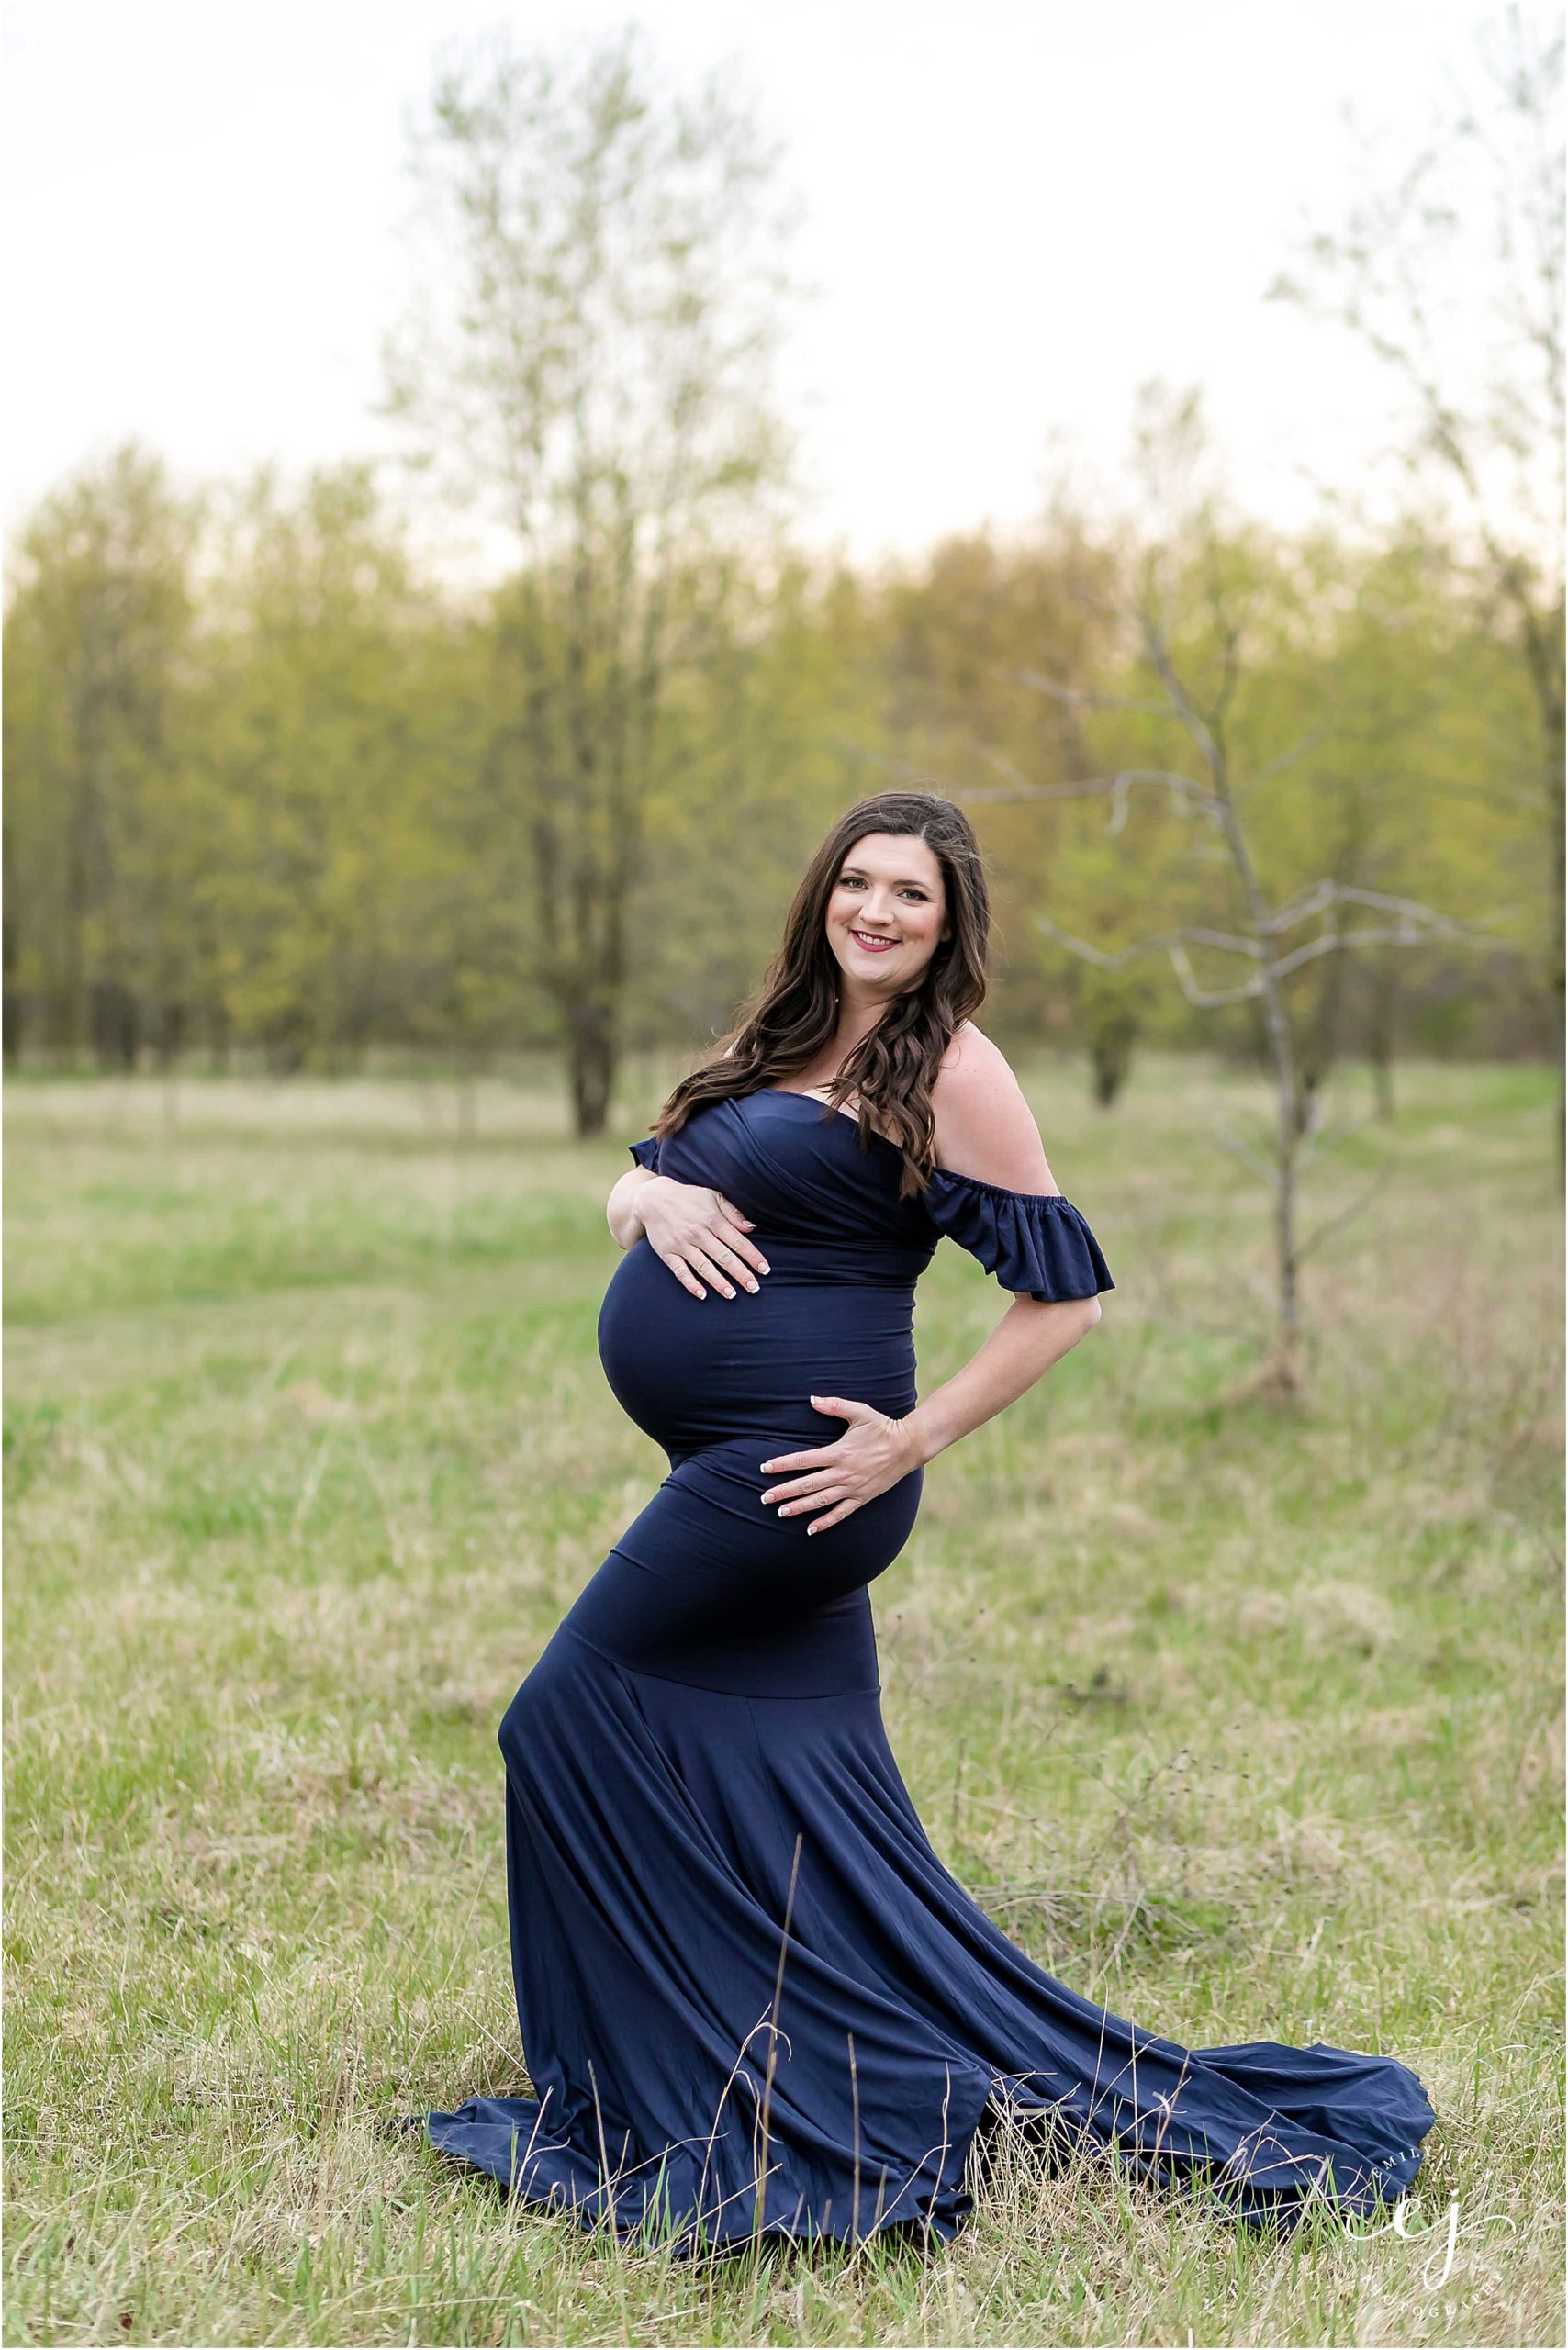 Maternity photoå navy blue off the shoulder dress in nature at sunset